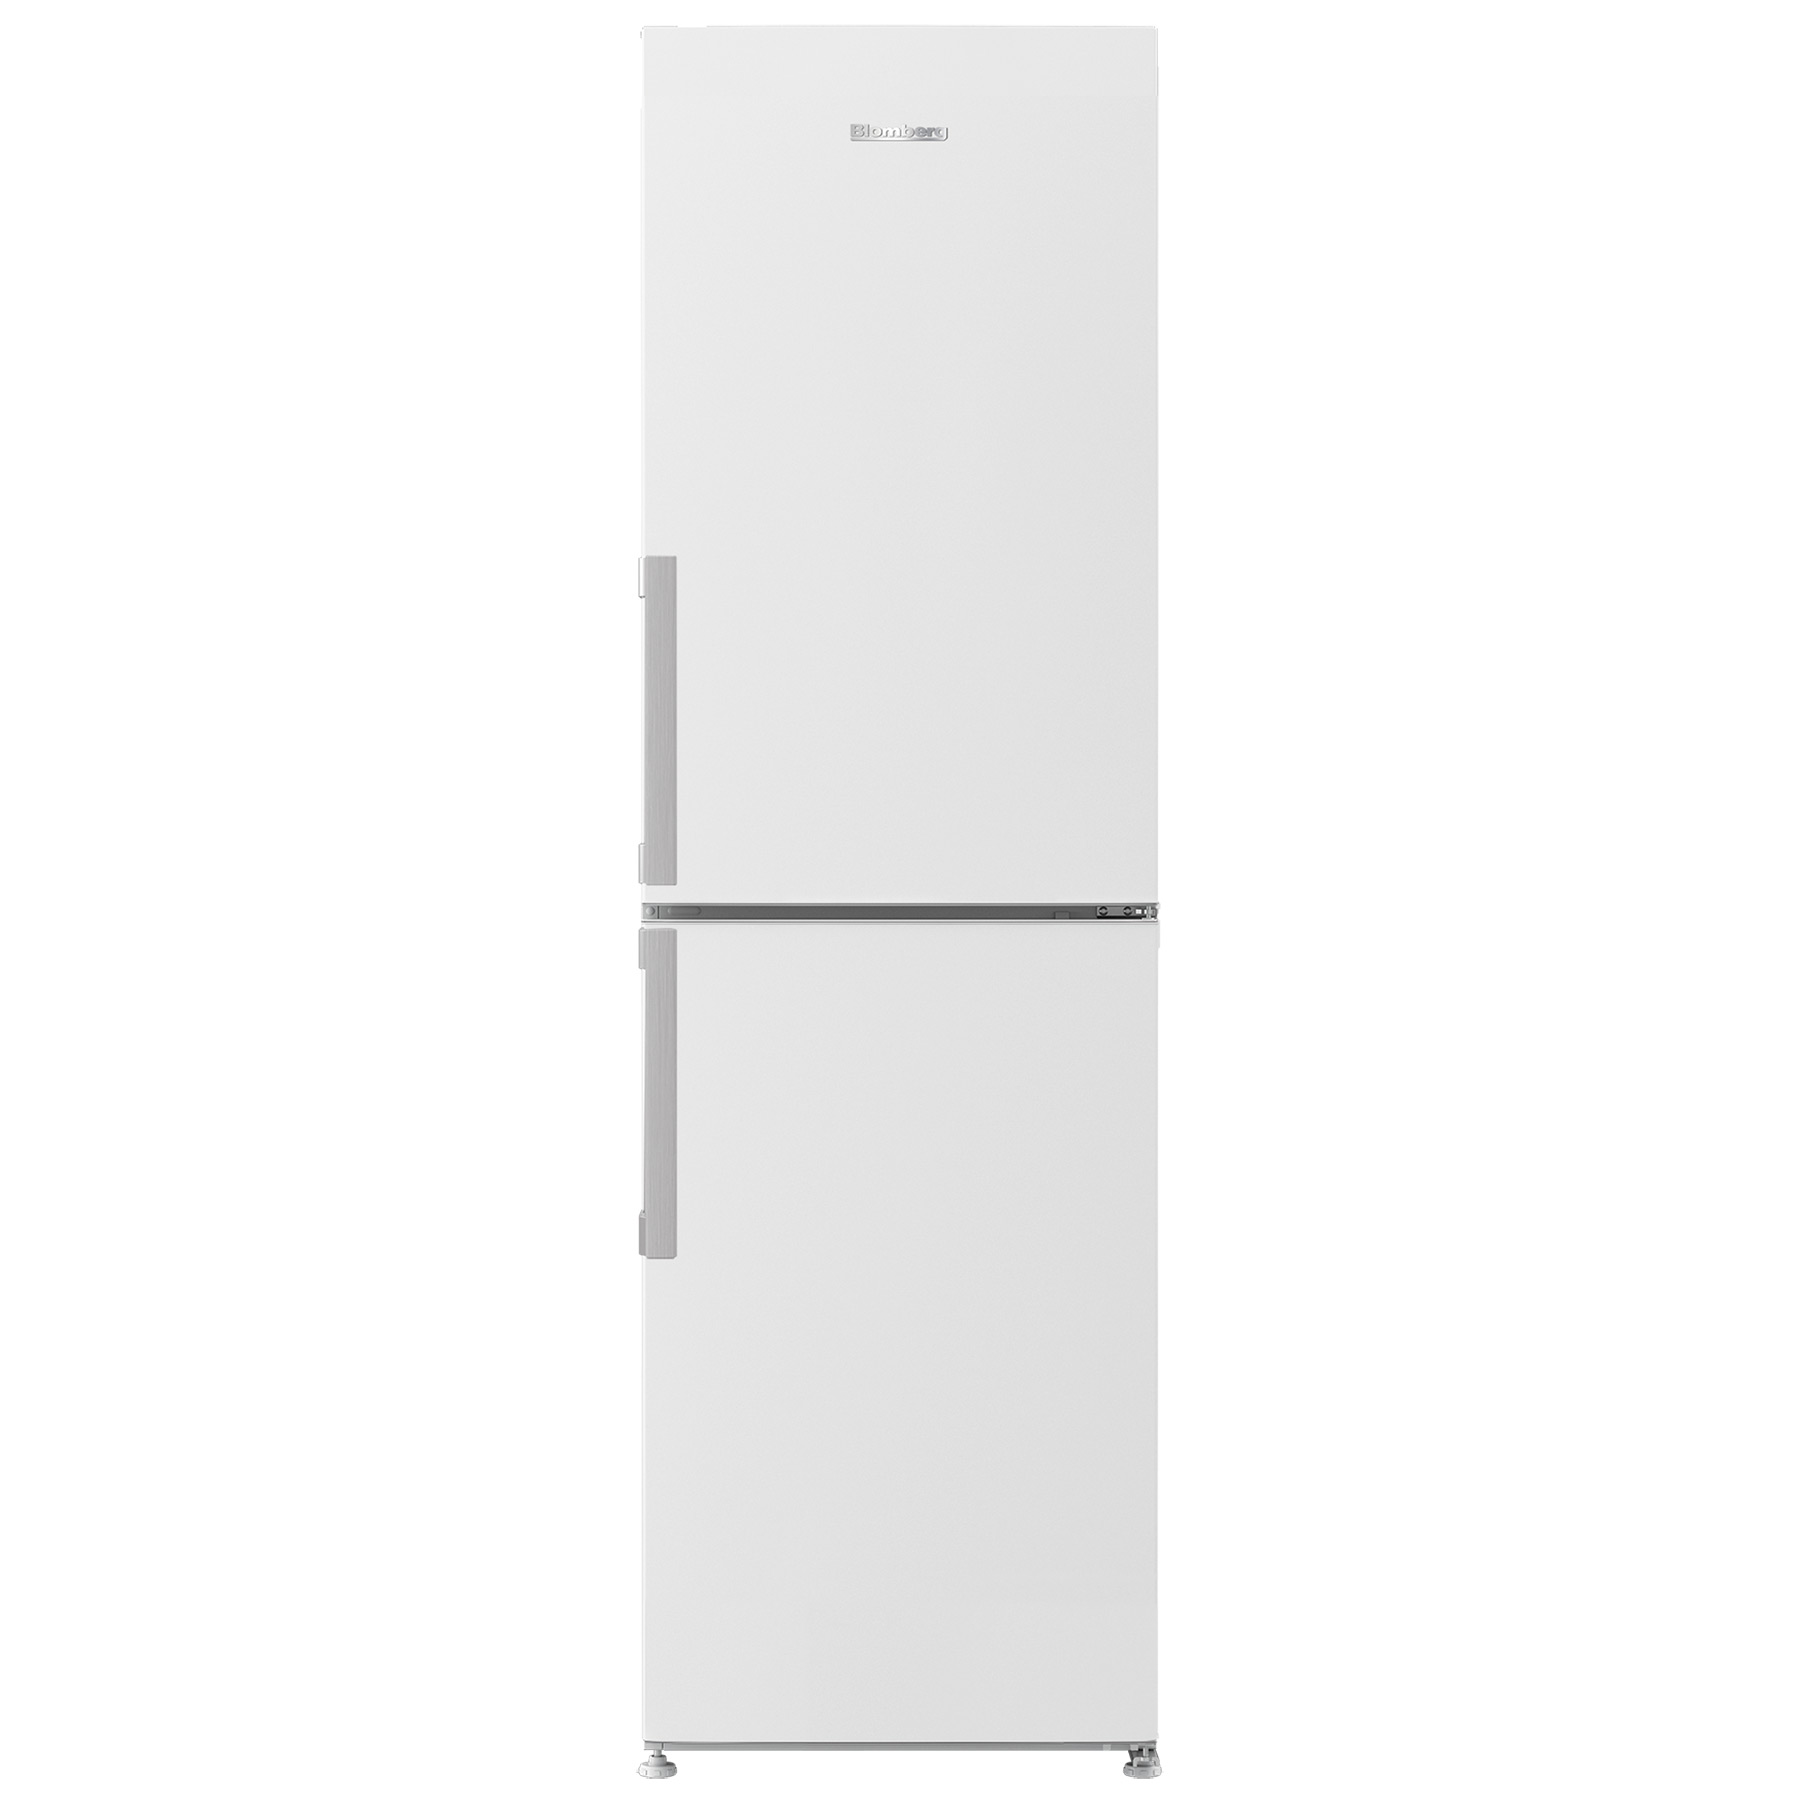 Image of Blomberg KGM4663 60cm Frost Free Fridge Freezer in White 1 91m F Rated